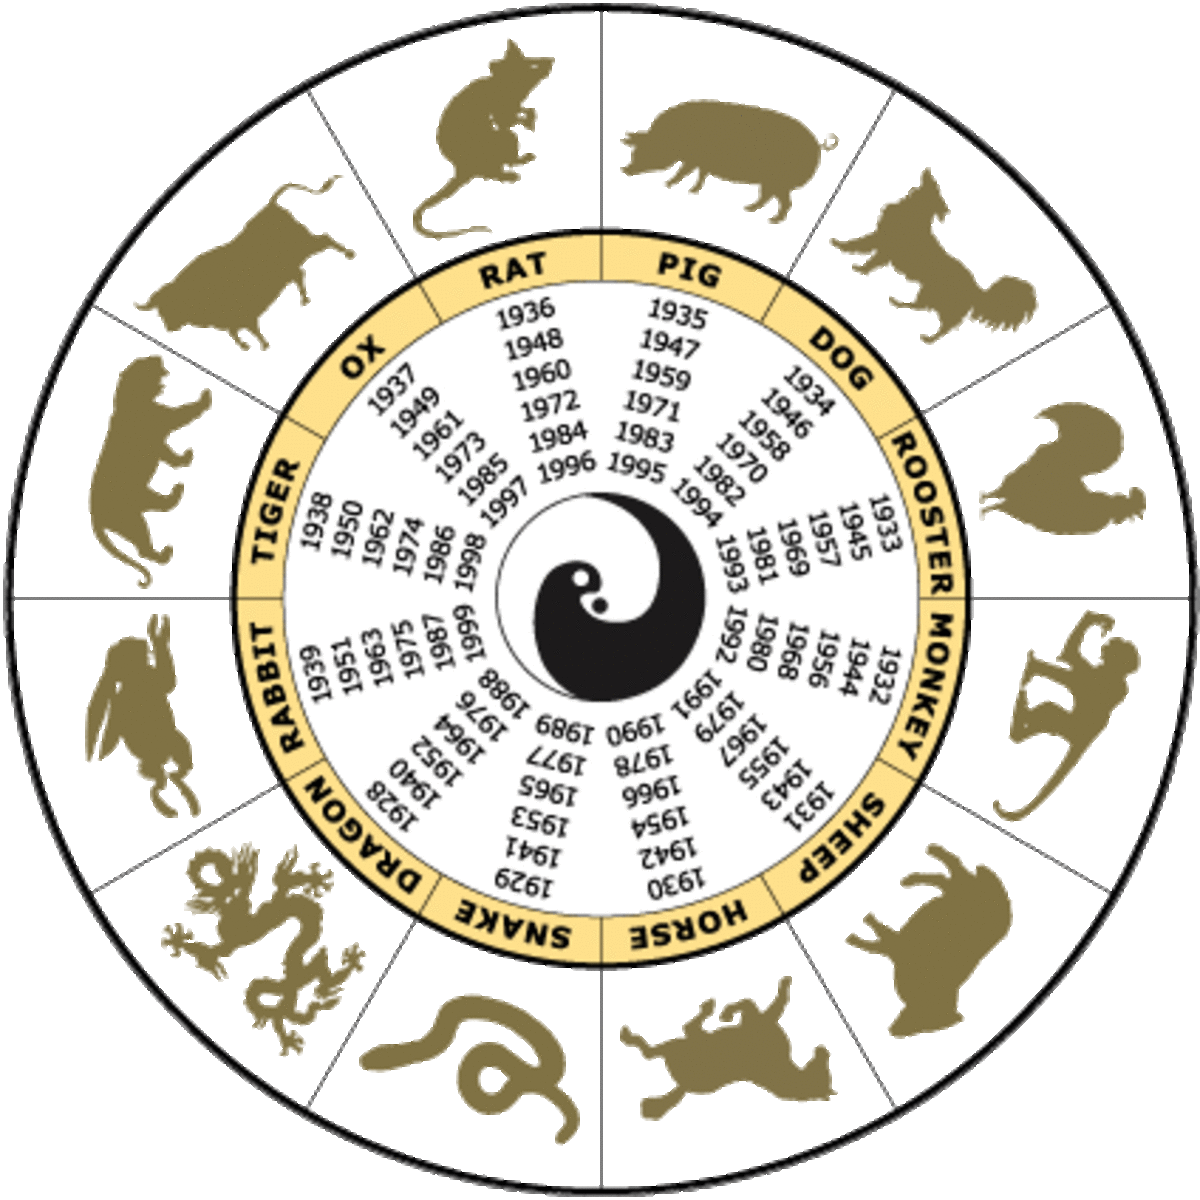 The 12 Chinese Zodiac Animals’ signs and the years